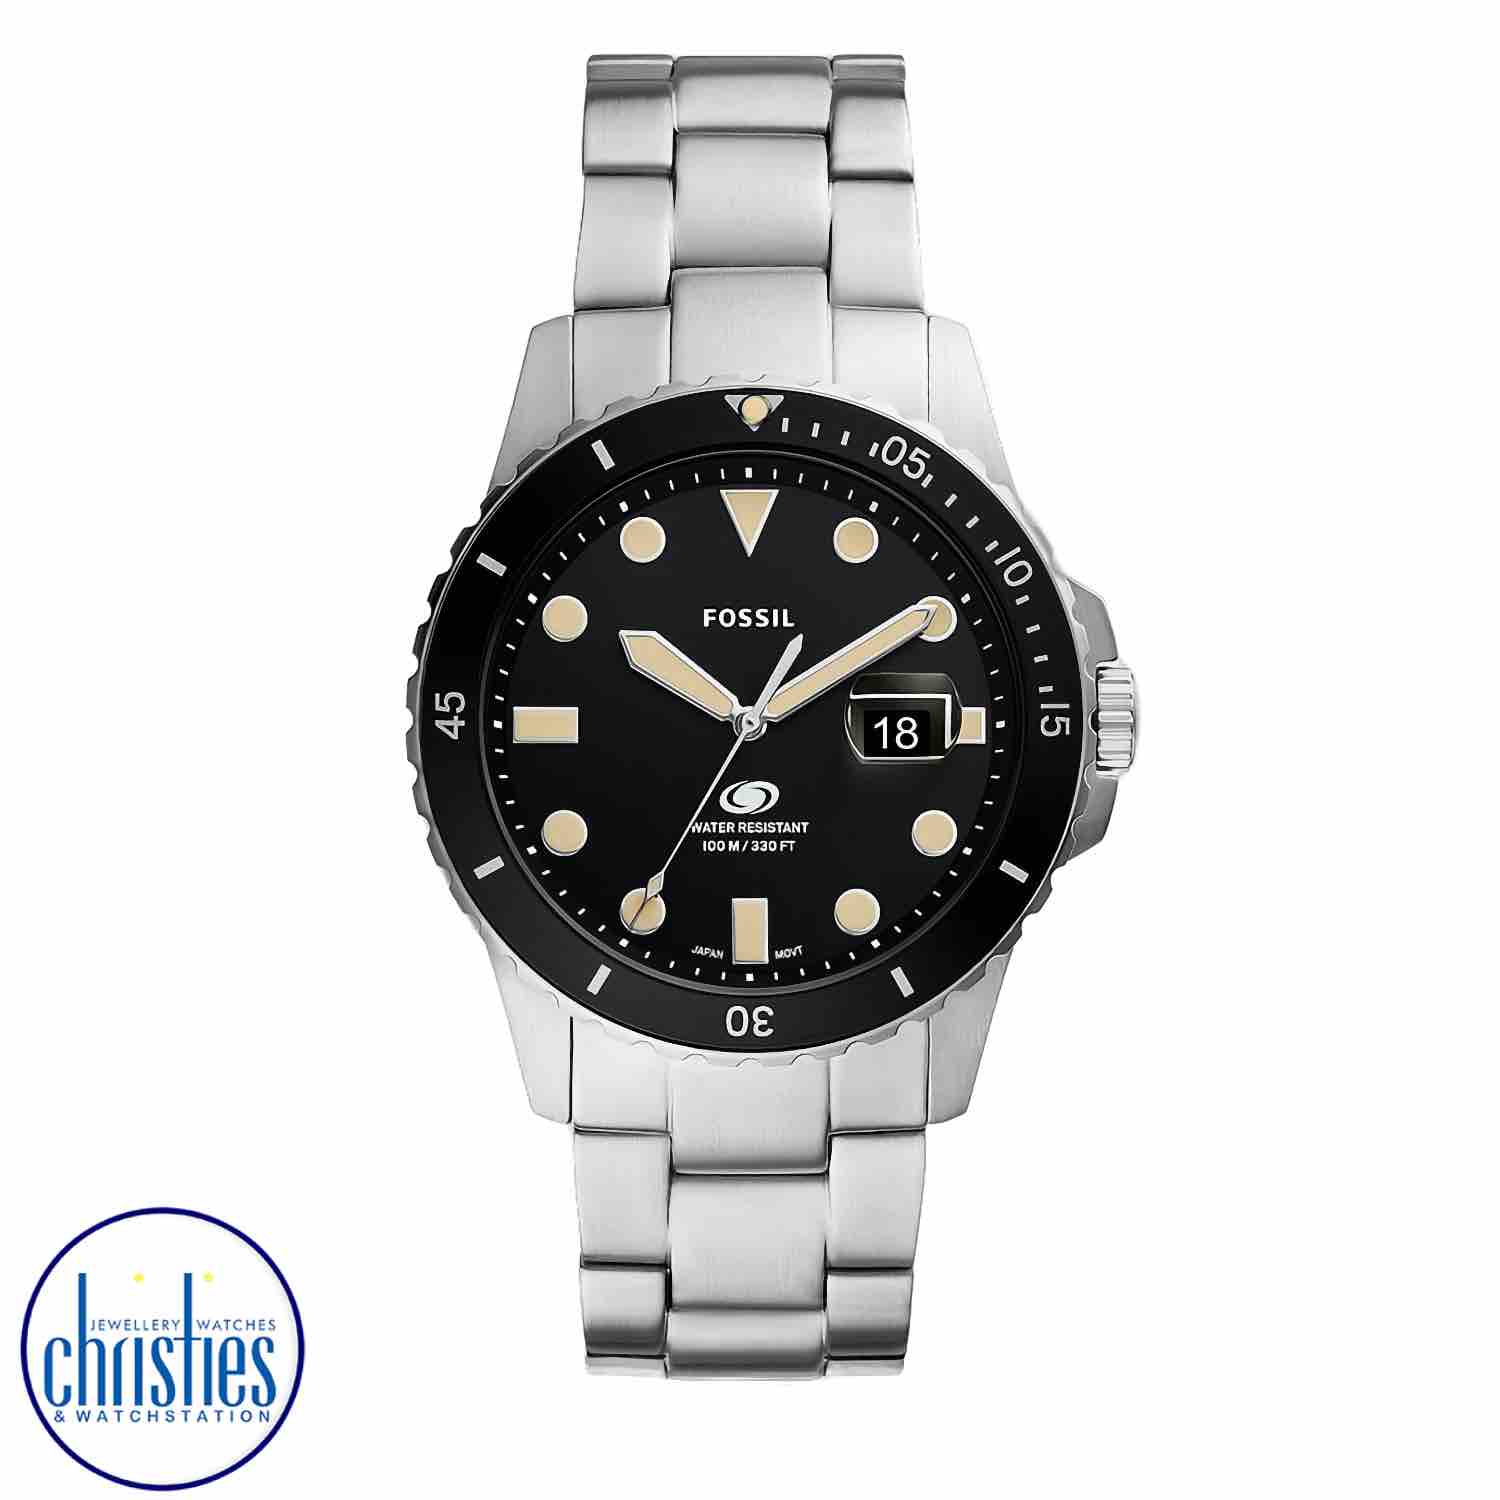 FS5952 Fossil Blue Three-Hand Date Stainless Steel Watch. FS5952 Fossil Blue Three-Hand Date Stainless Steel WatchAfterpay - Split your purchase into 4 instalments - Pay for your purchase over 4 instalments, due every two weeks. fossil mens watches nz